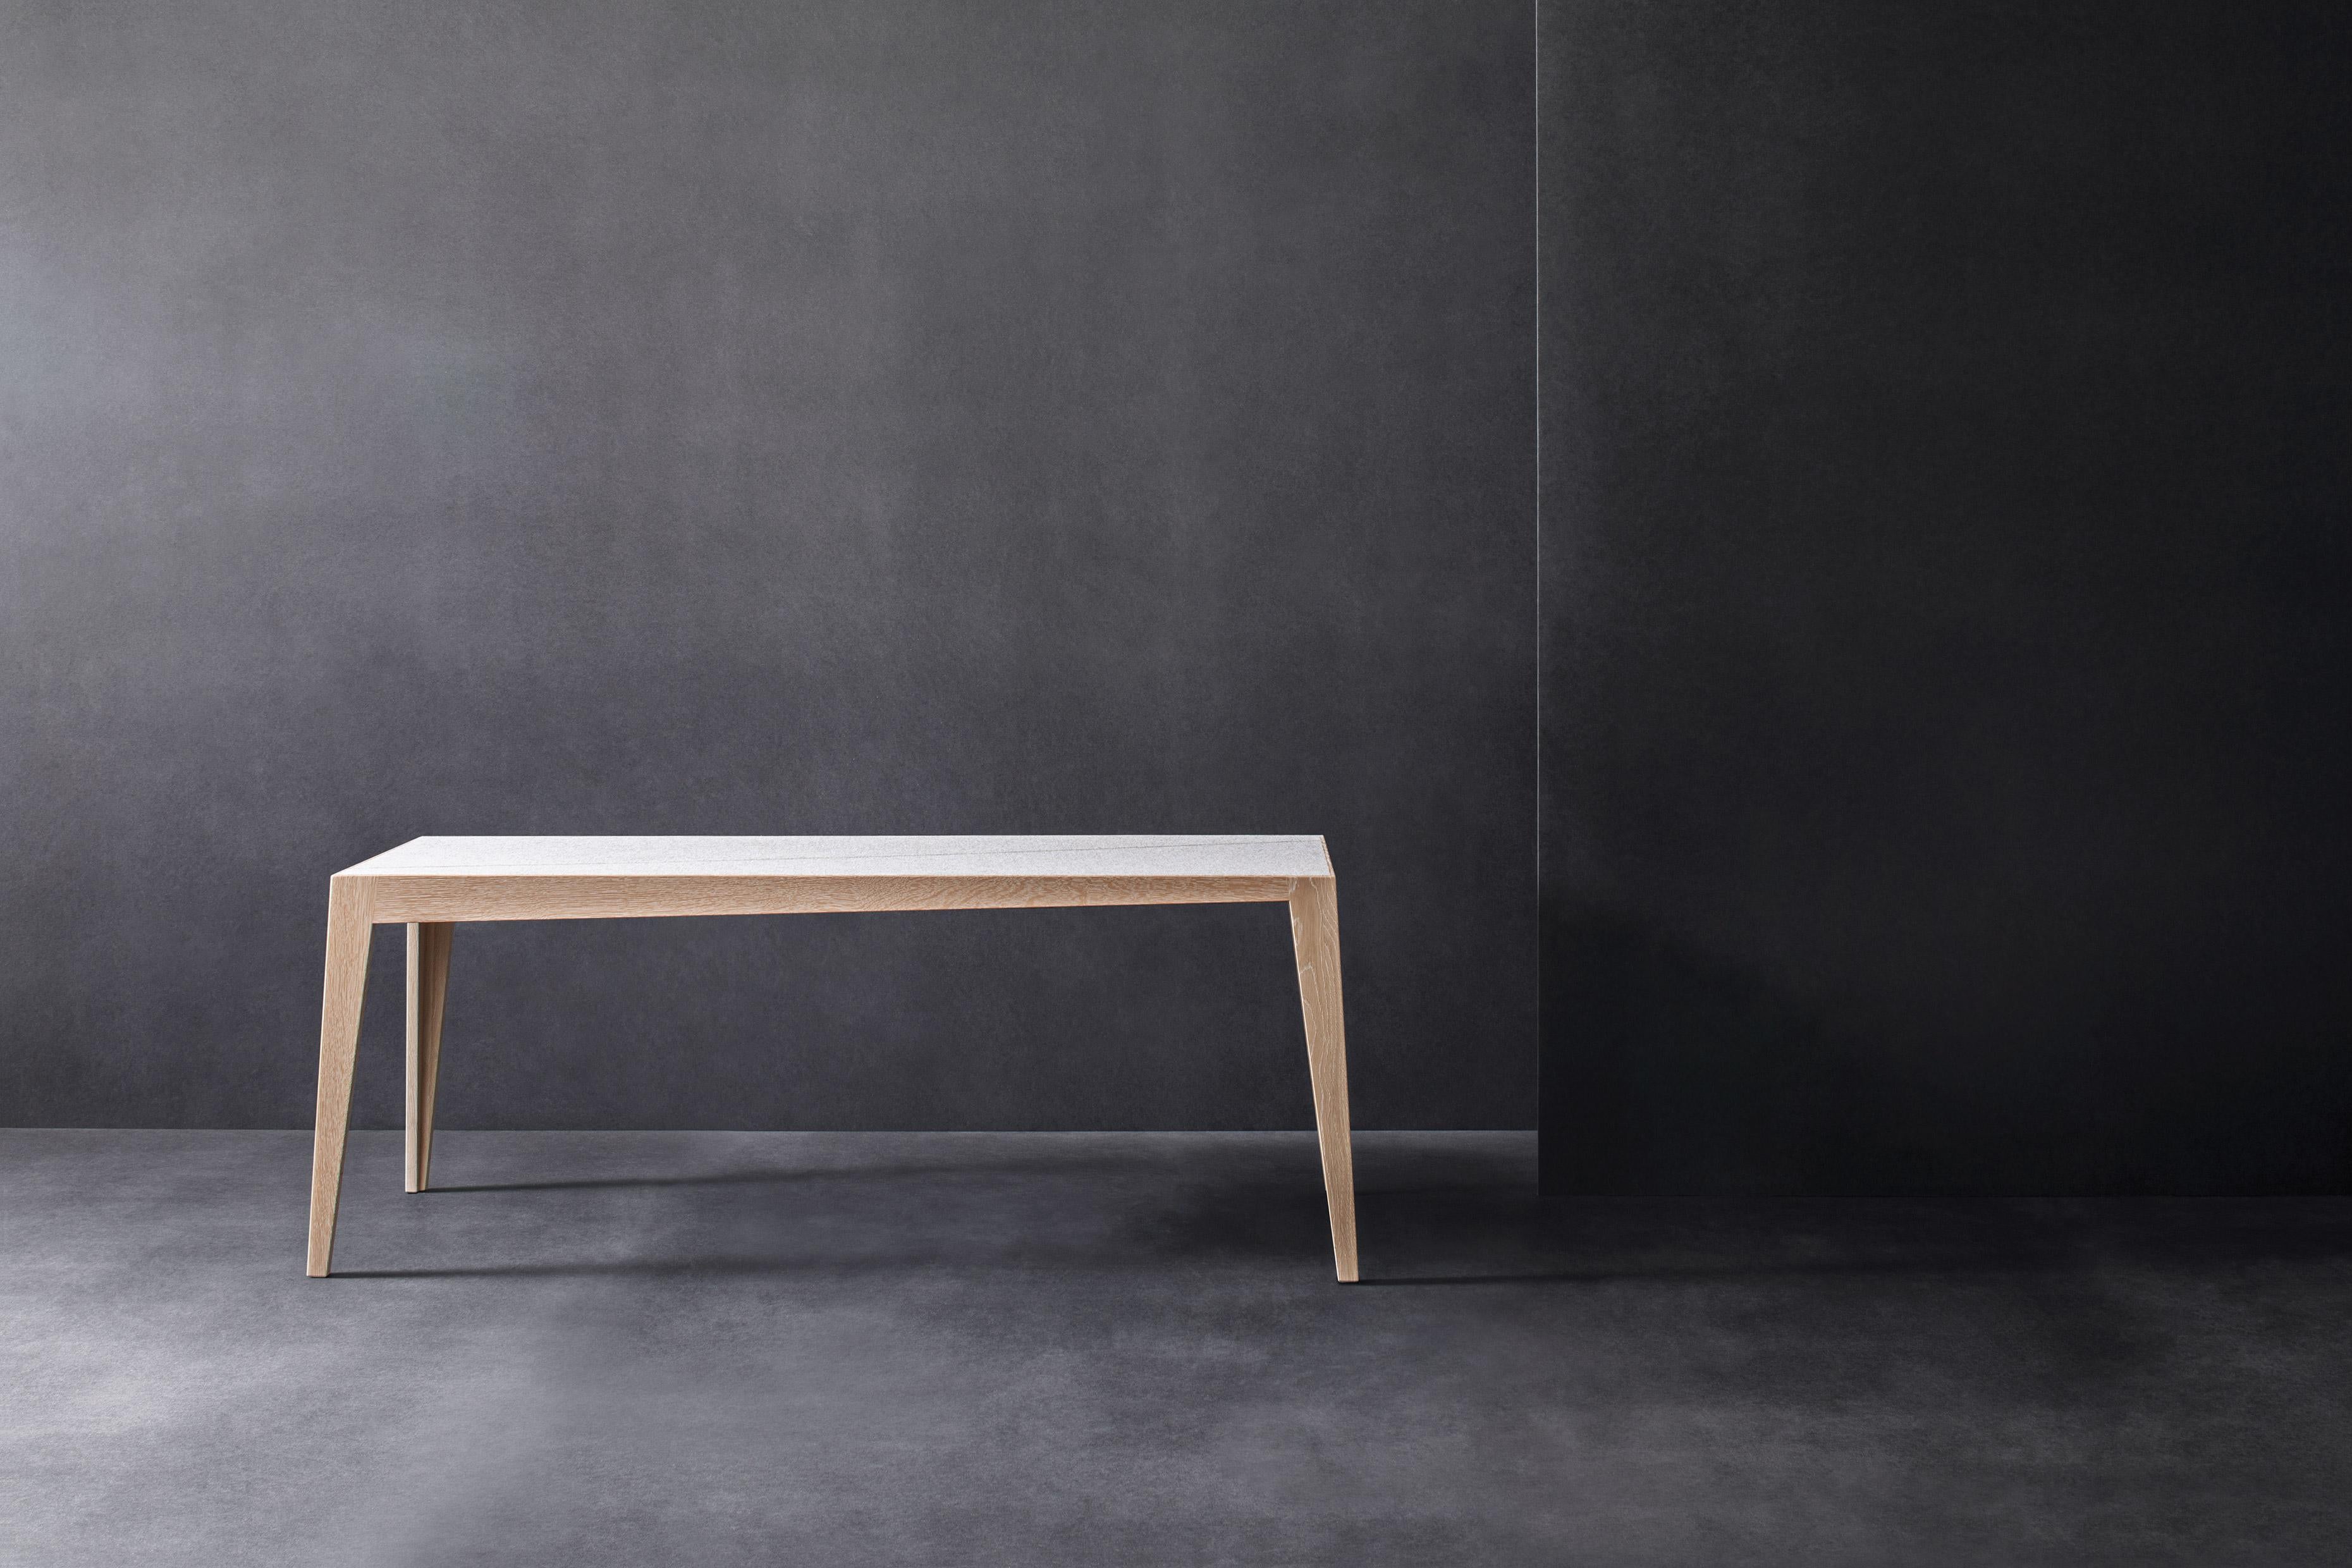 Tocker bench by Matthias Scherzinger
Dimensions: H 48 x W 40 x L 120 cm
Materials: oak white lyed, oil
 seat: needled felt light-grey

Also available in black oak.
Other sizes and types of wood.

The Tocker is a lightweight solid wood table